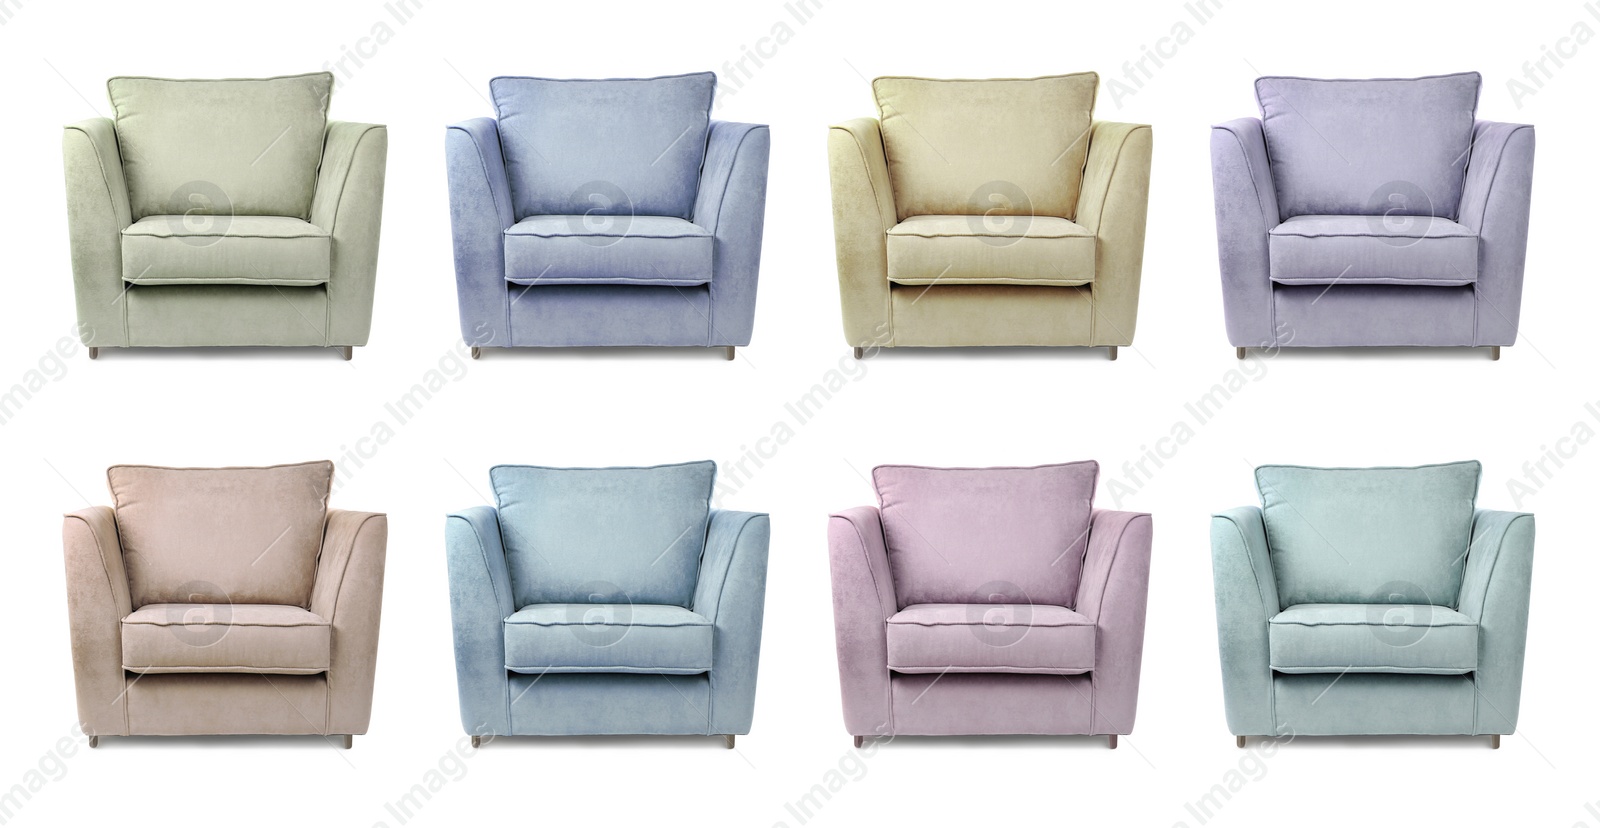 Image of Different colorful armchairs isolated on white, set